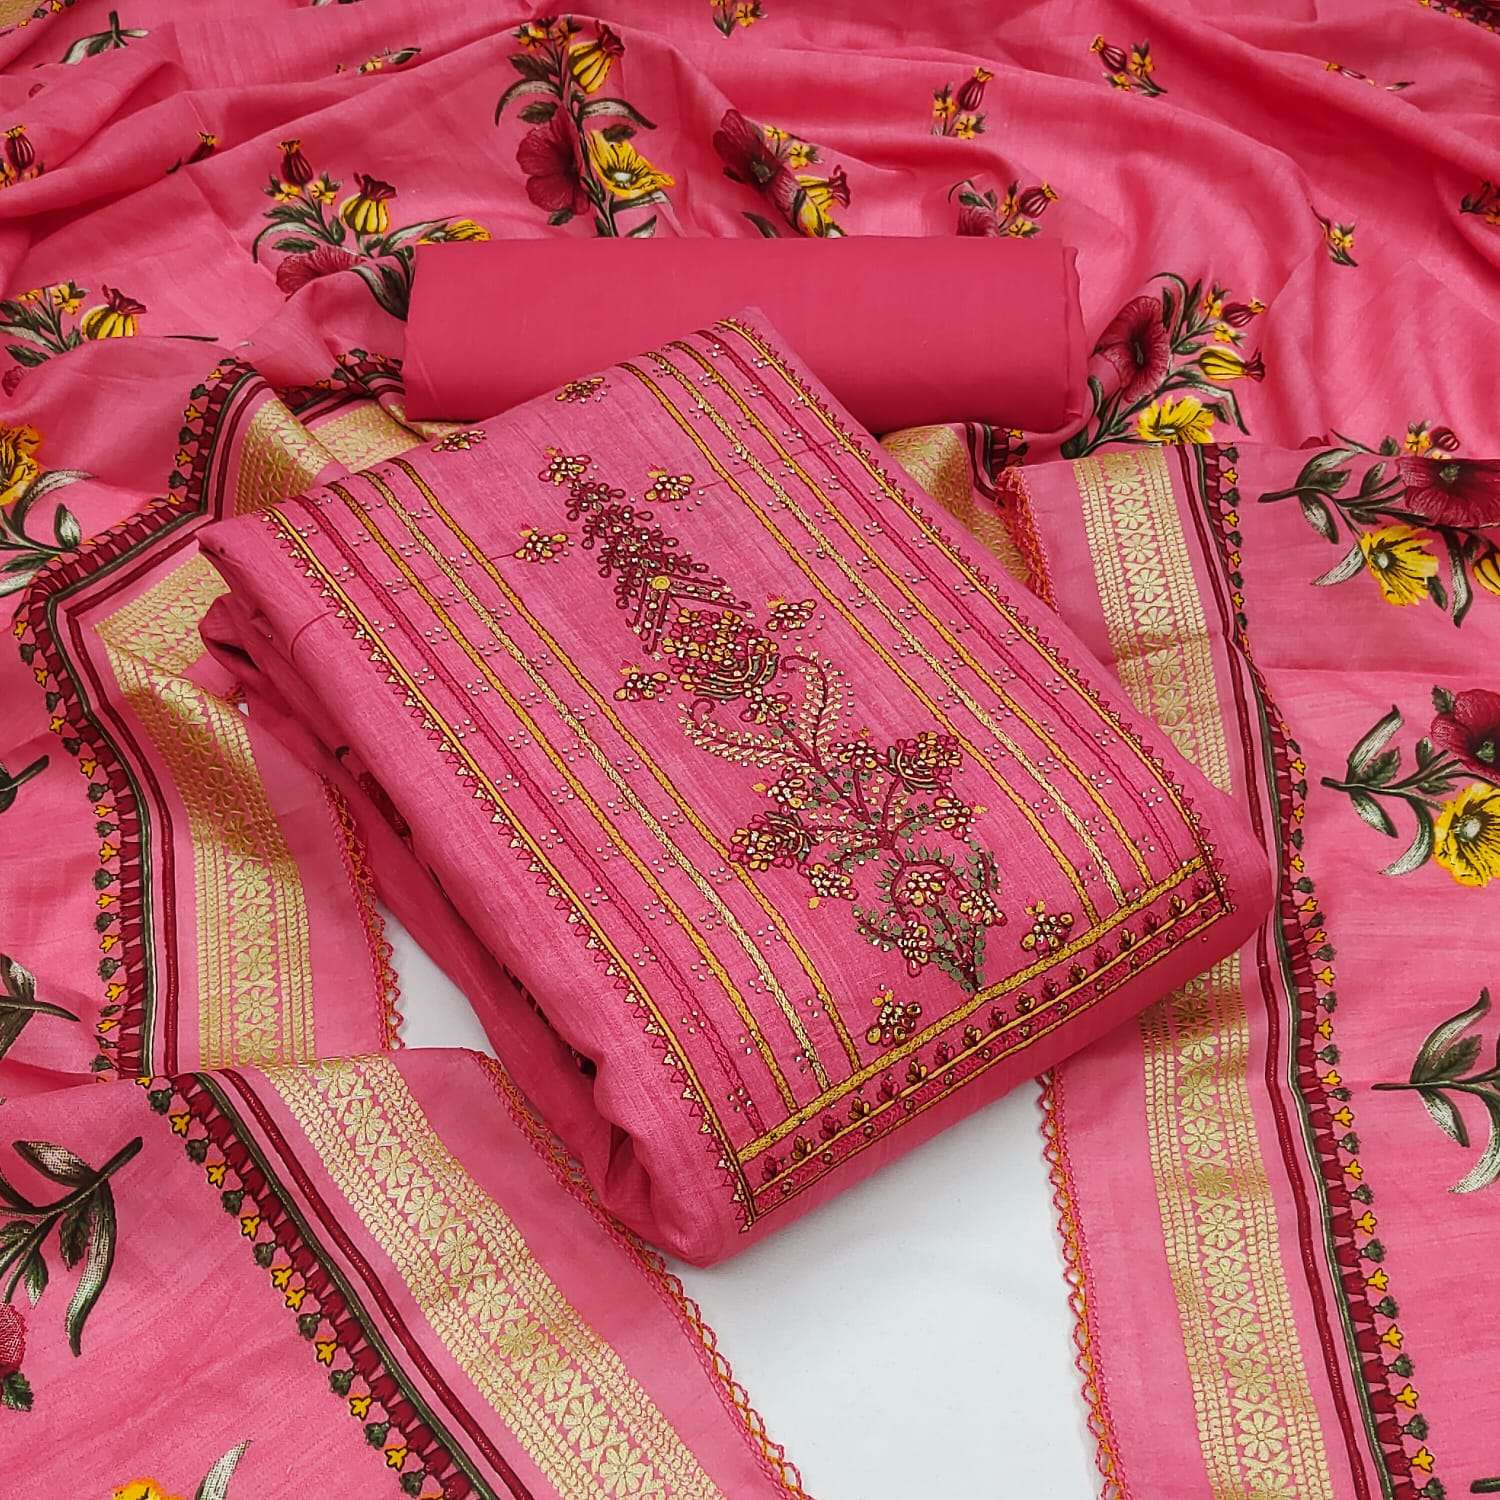 Hermitage Mehraan Designer Superior pure Cotton Printed and embroidery and swarovski work in wholesale rate